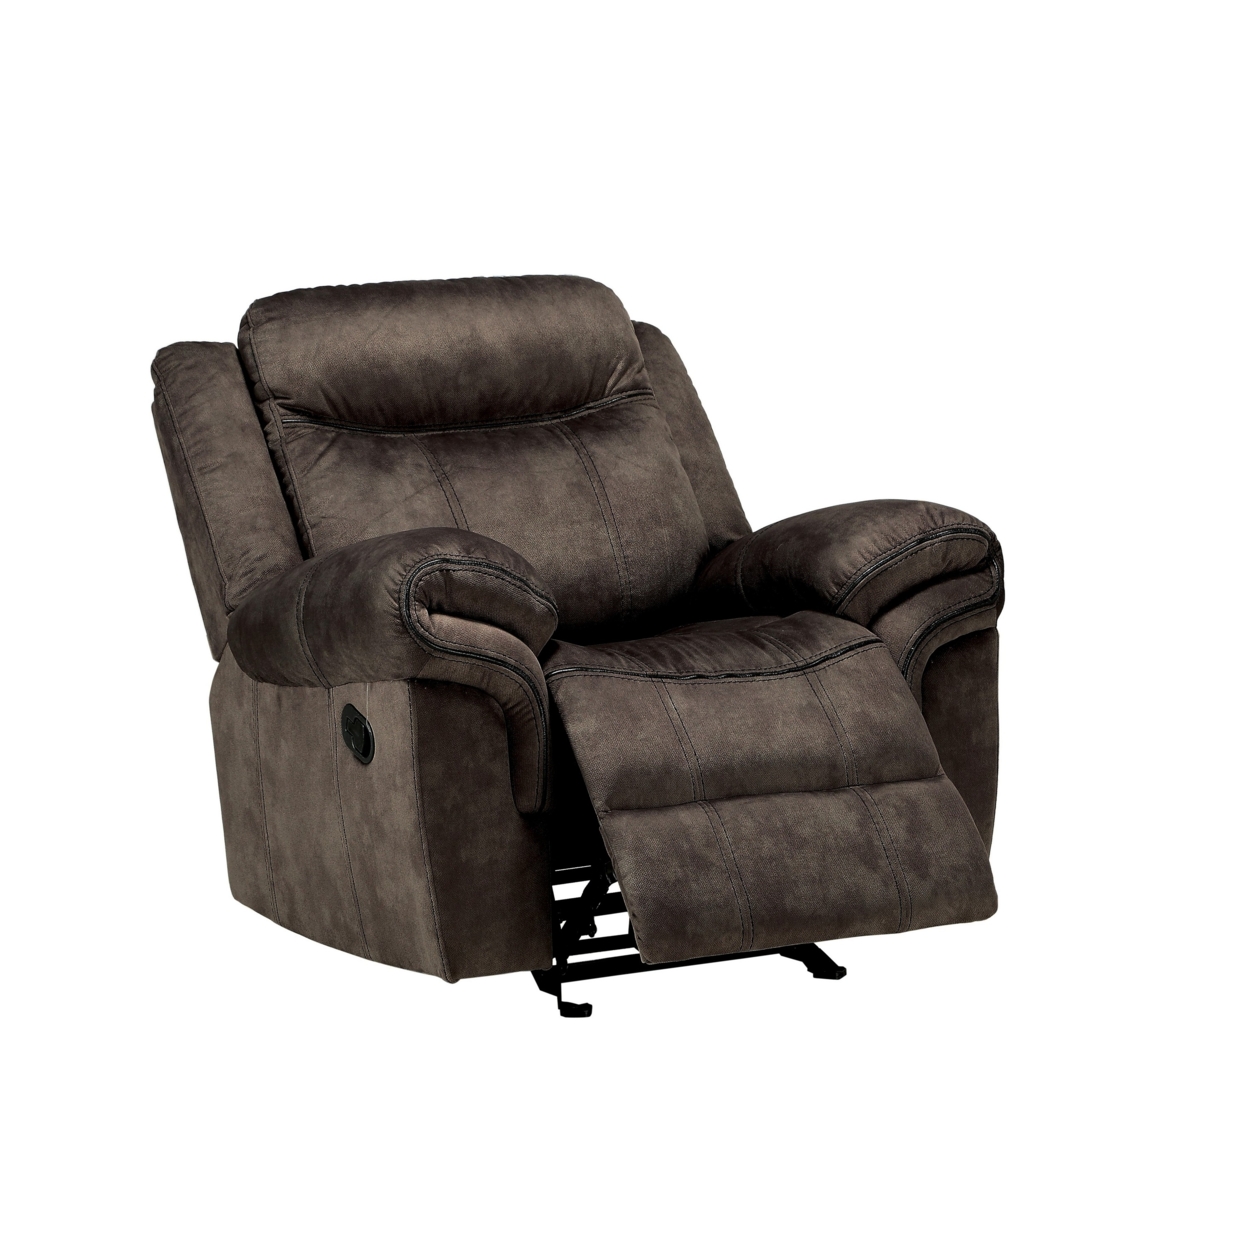 42 Inch Recliner Club Chair, Split Back, Pillow Top, Charcoal Gray Fabric